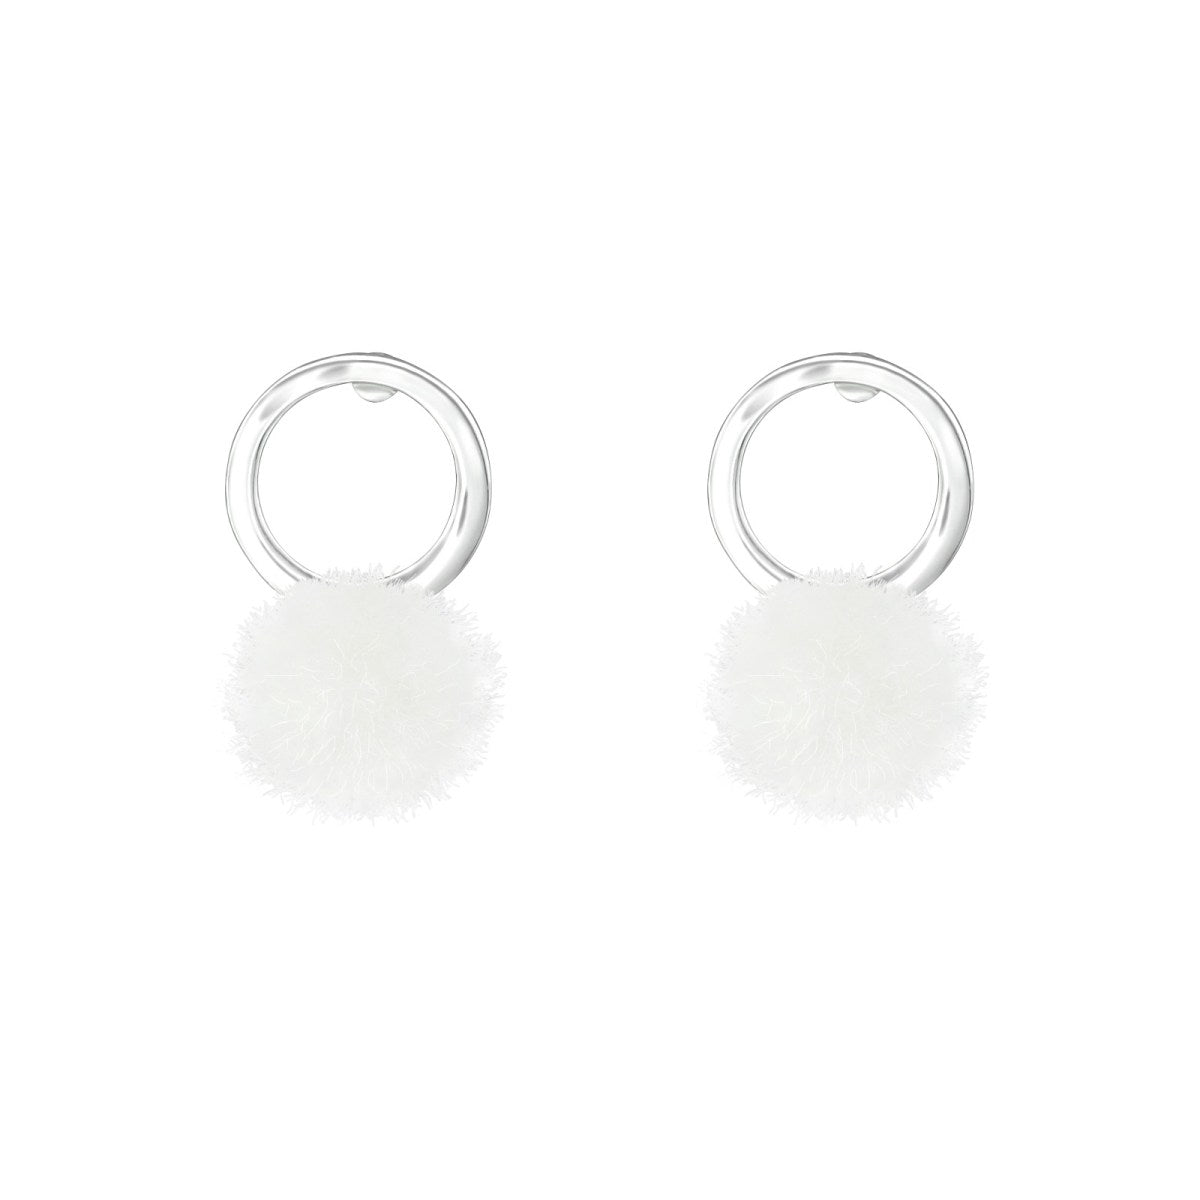 Children's Silver Circle Stud Earrings with Pom-Pom